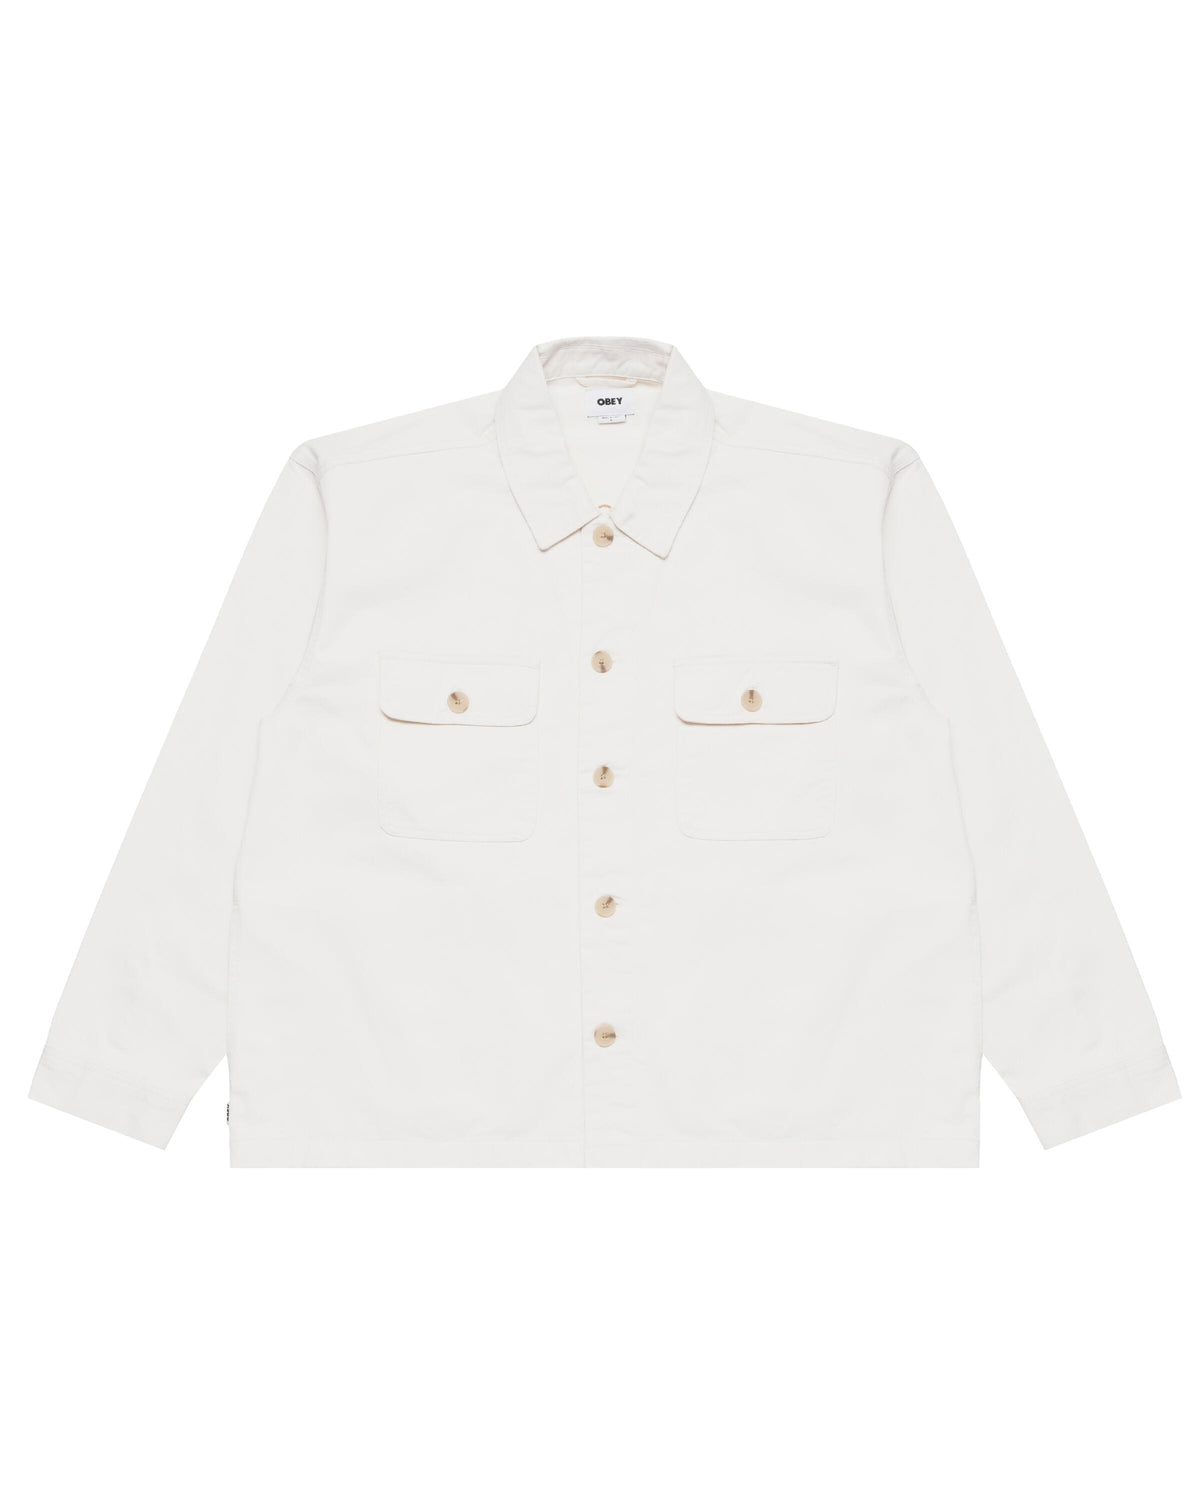 Obey AFTERNOON SHIRT JACKET